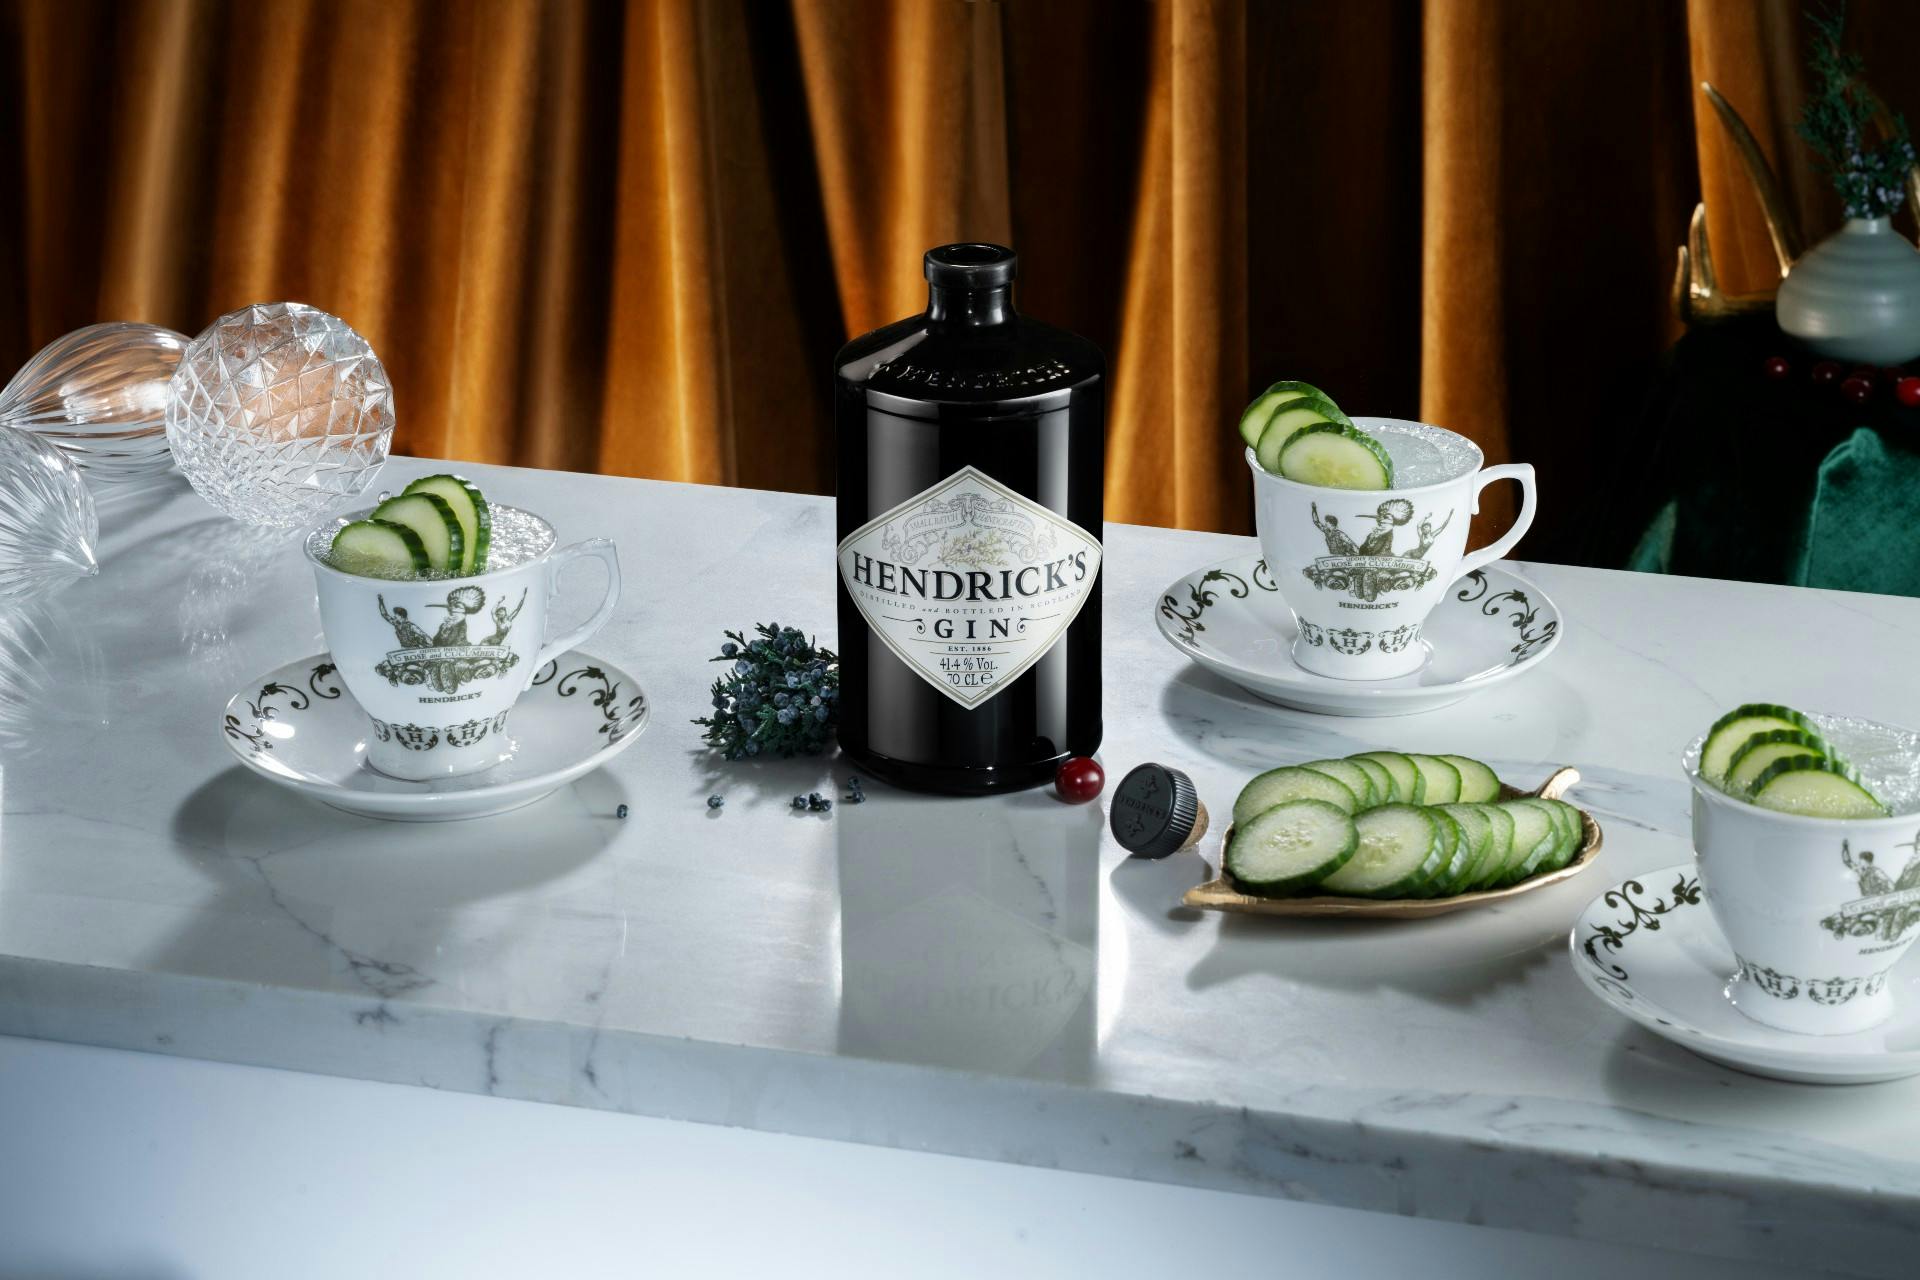 Hendrick's Gin, Tonic and Glasses Gift Set - 41.4% ABV from £58.45